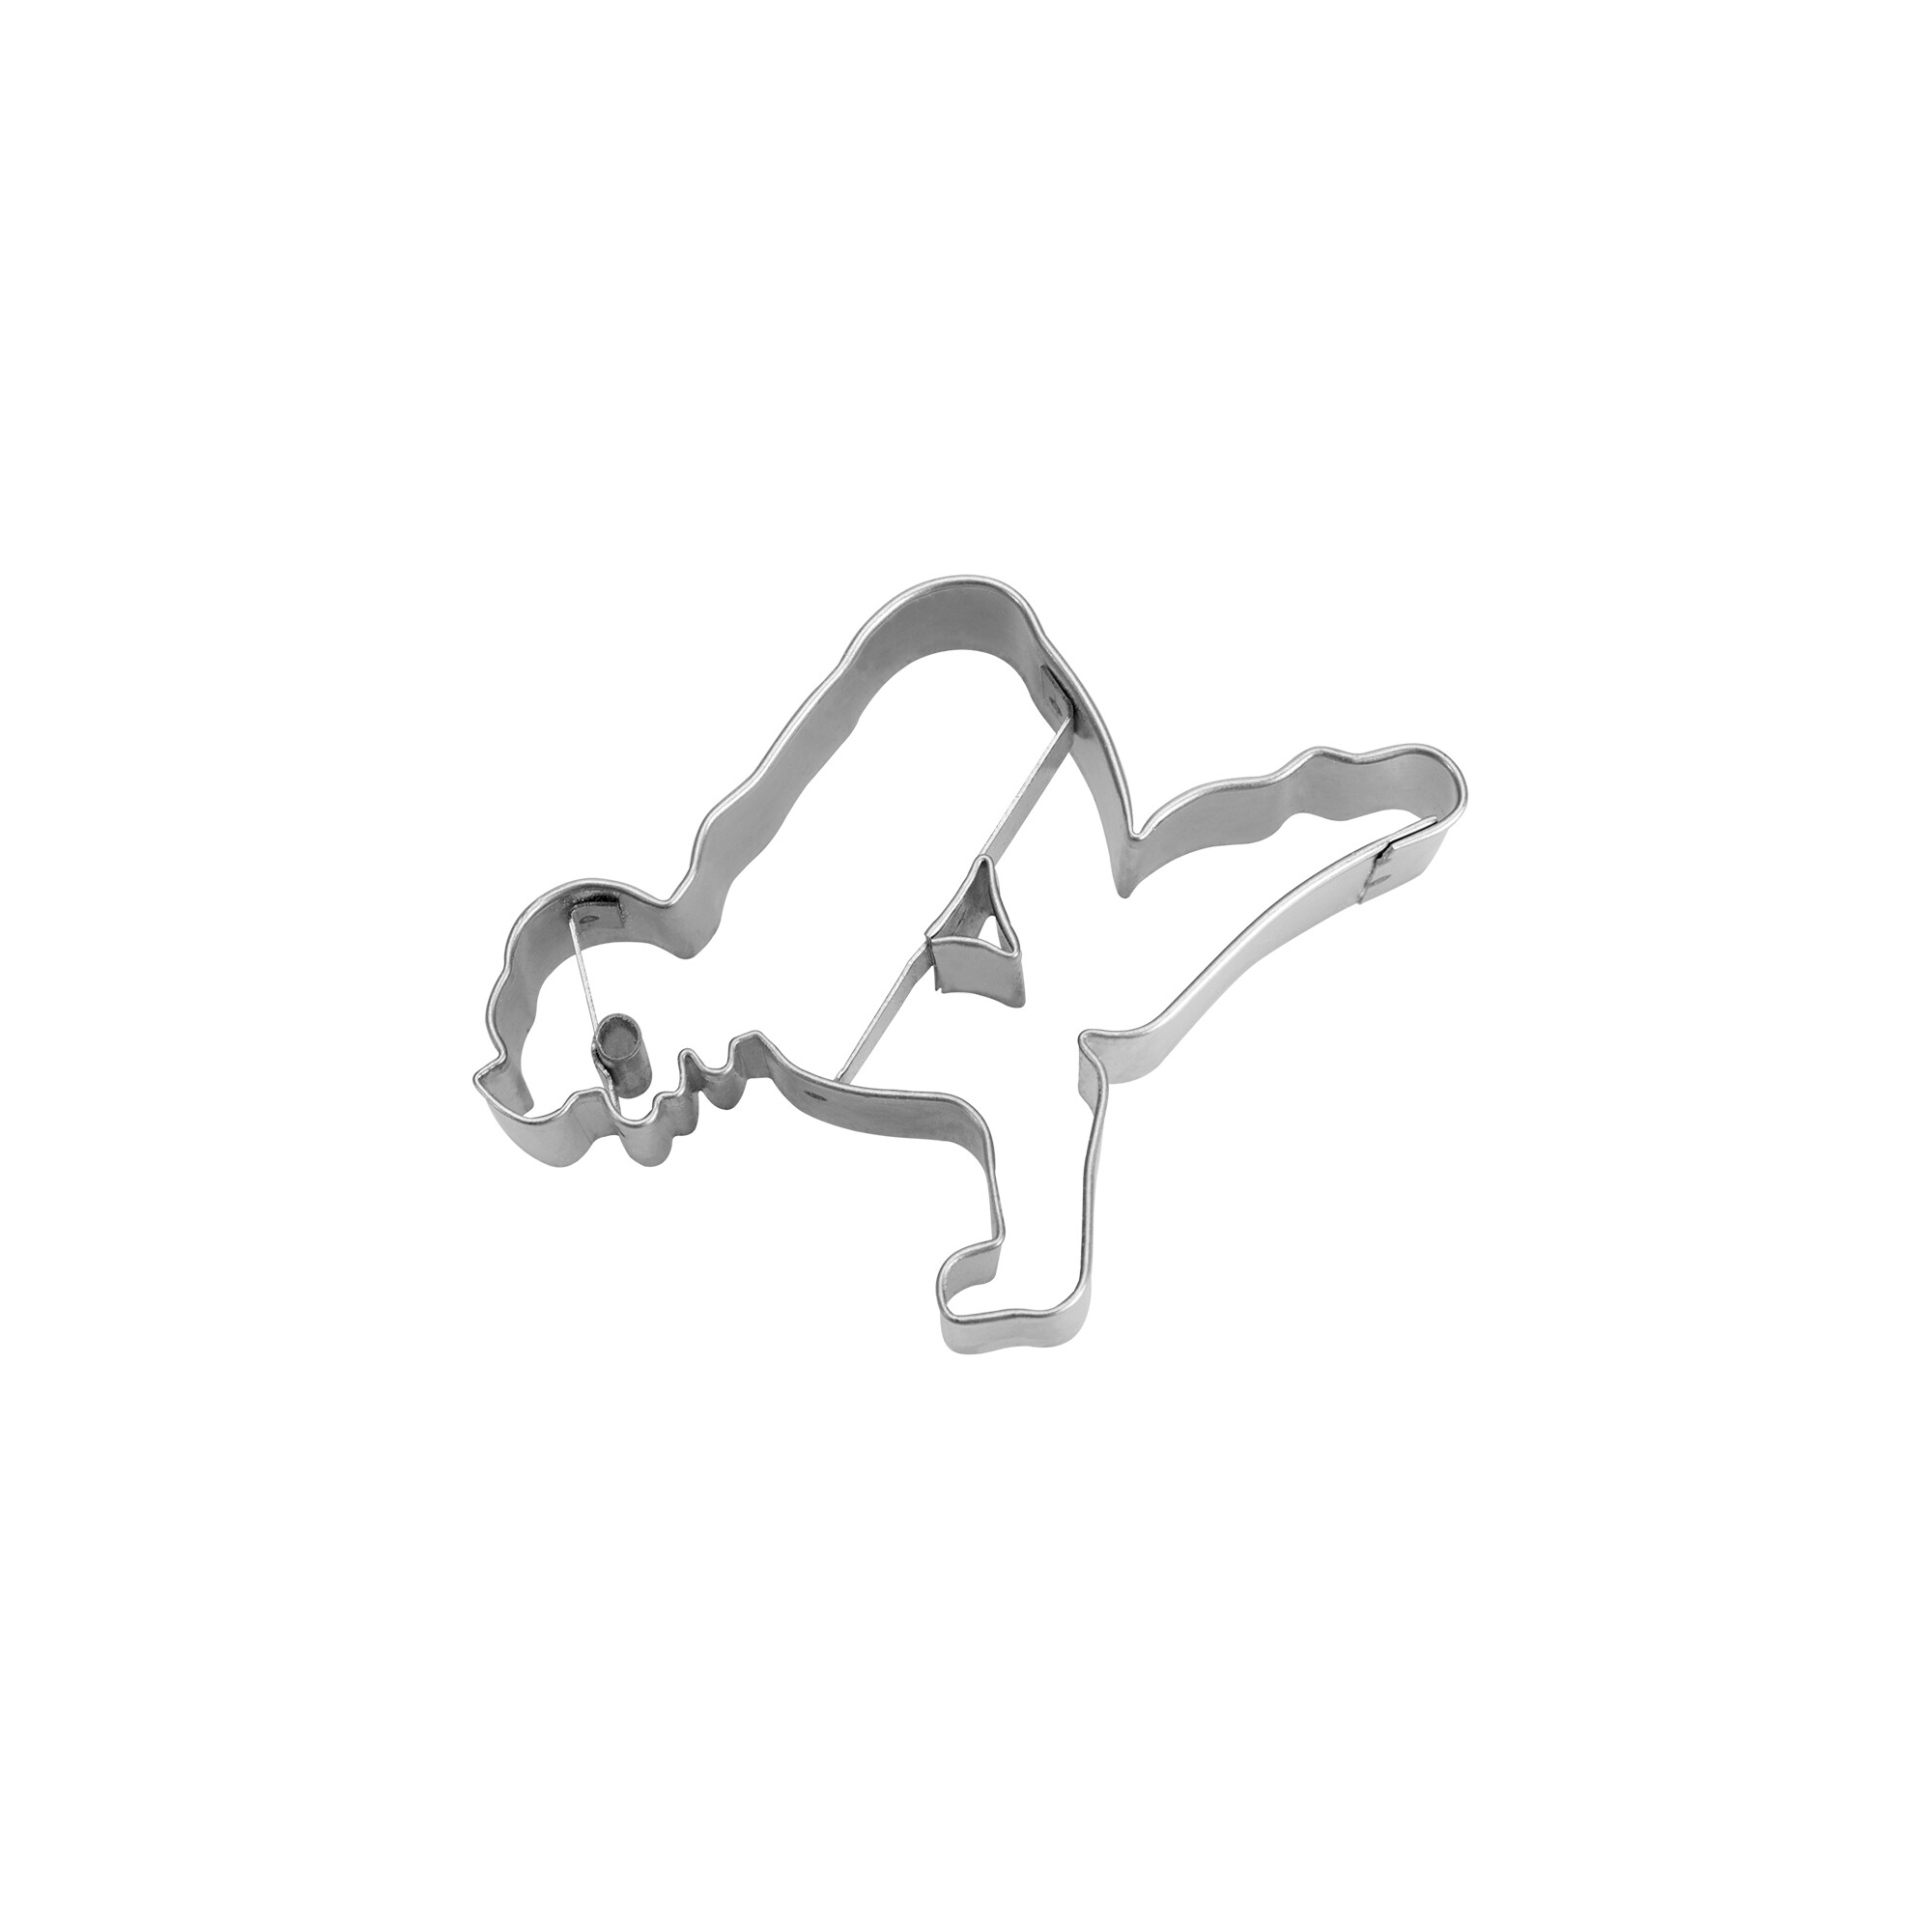 Cookie Cutter – Yoga - Crow